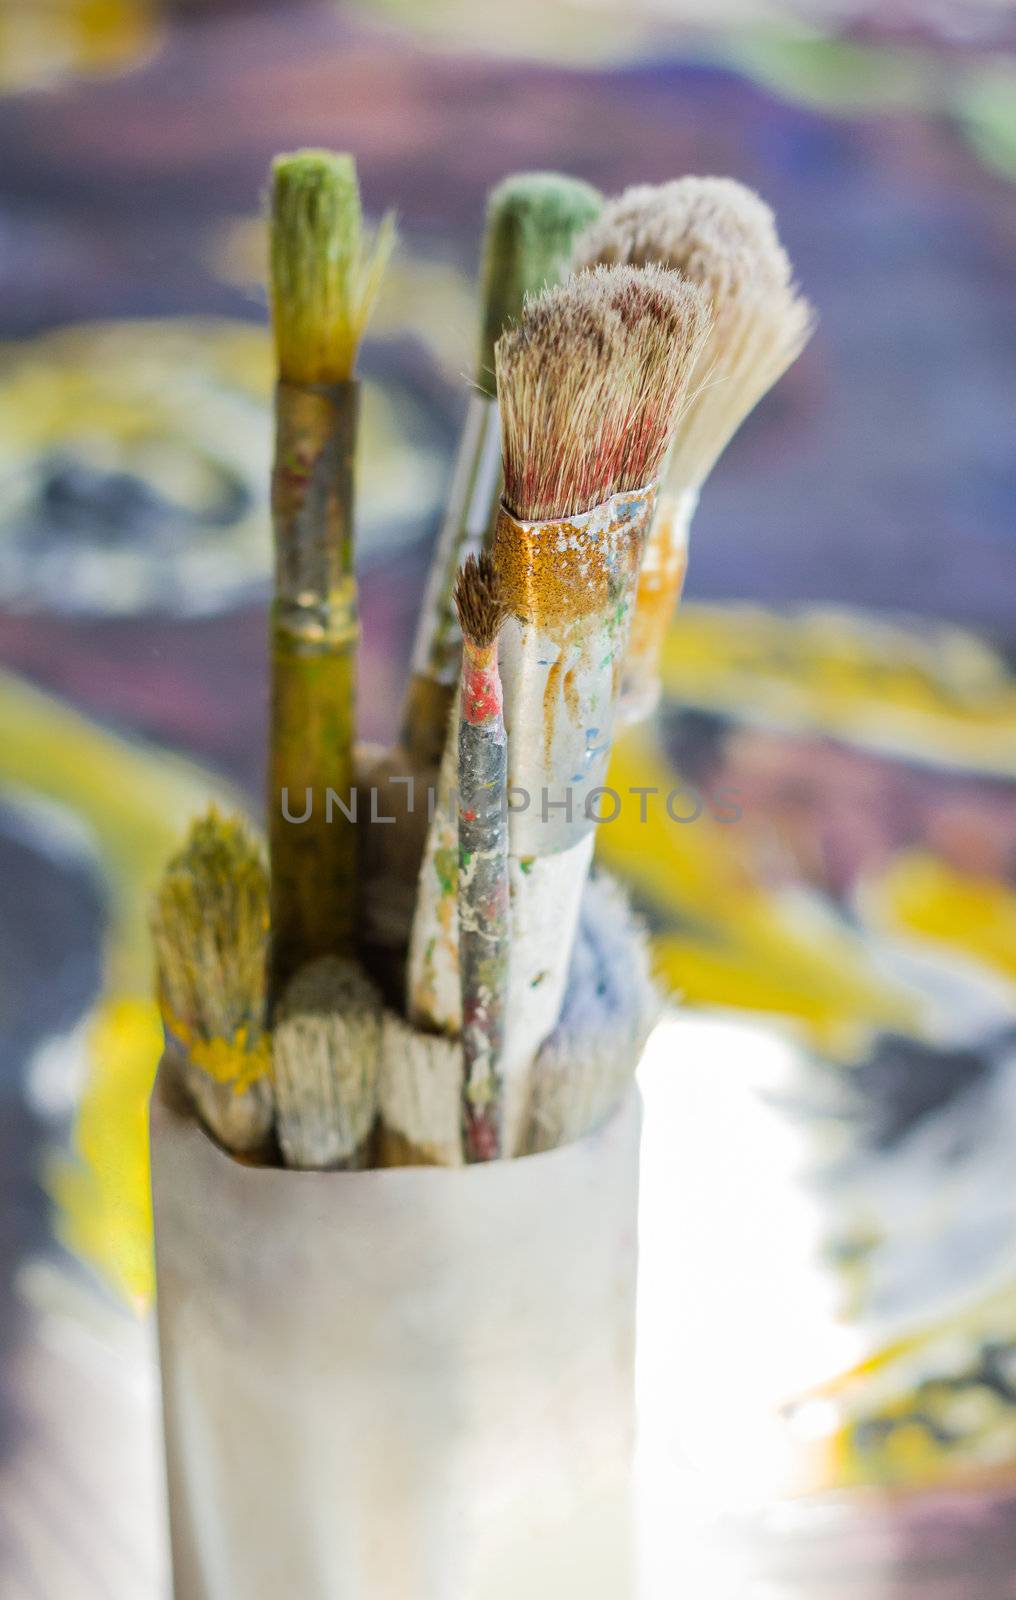 Set of paint brushes on oil painting by doble.d